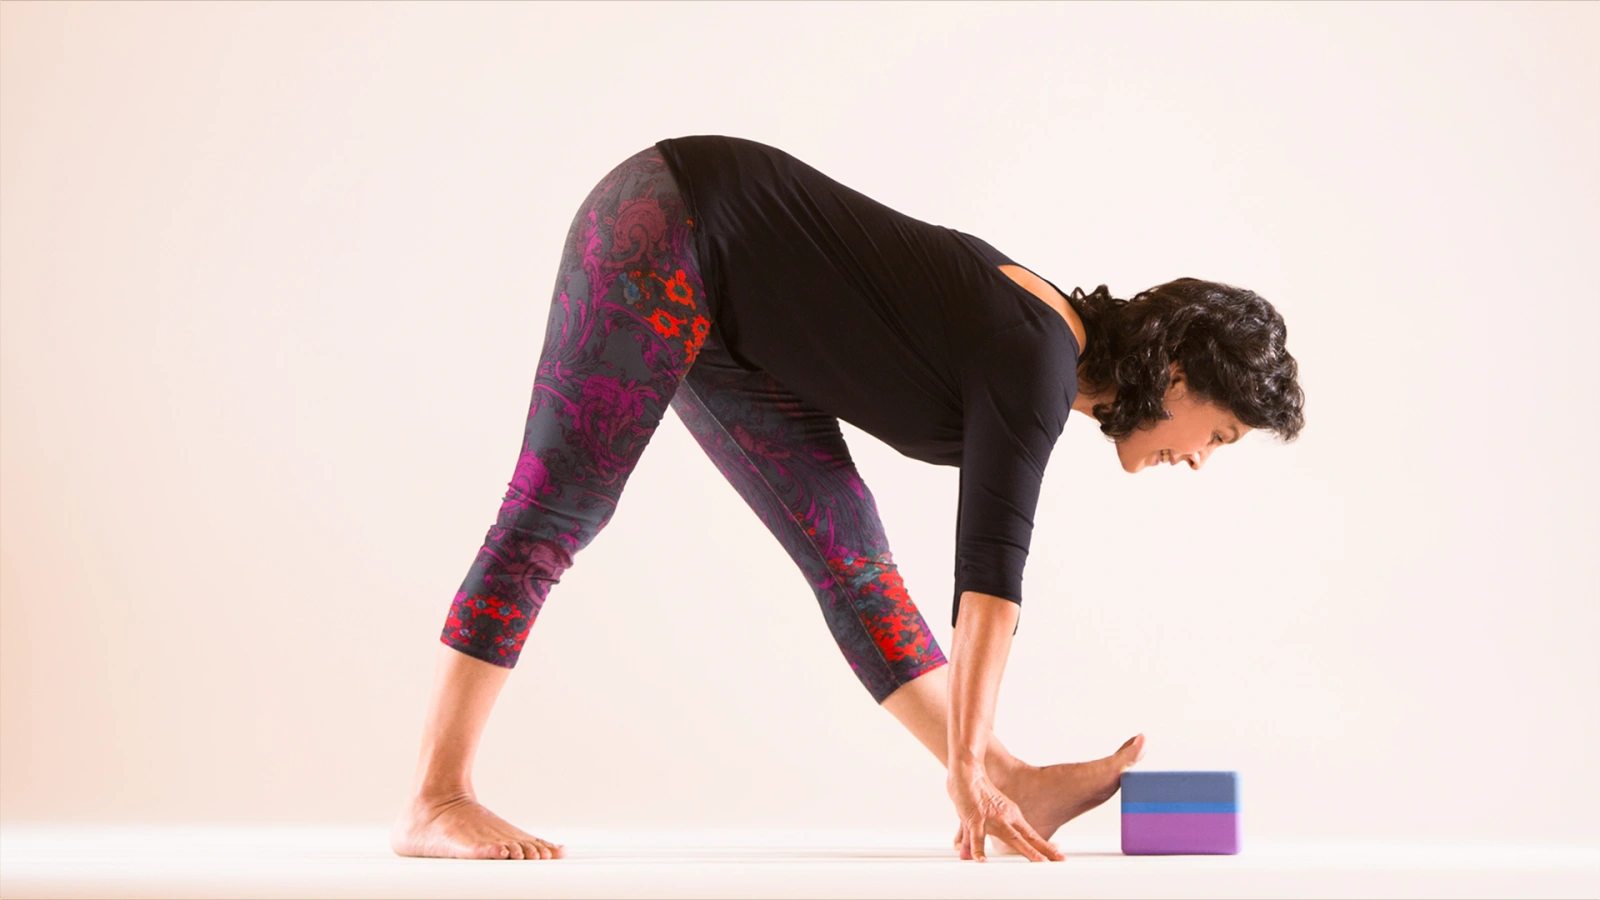 Yoga Poses For Two - Imagine impossible poses and just try them